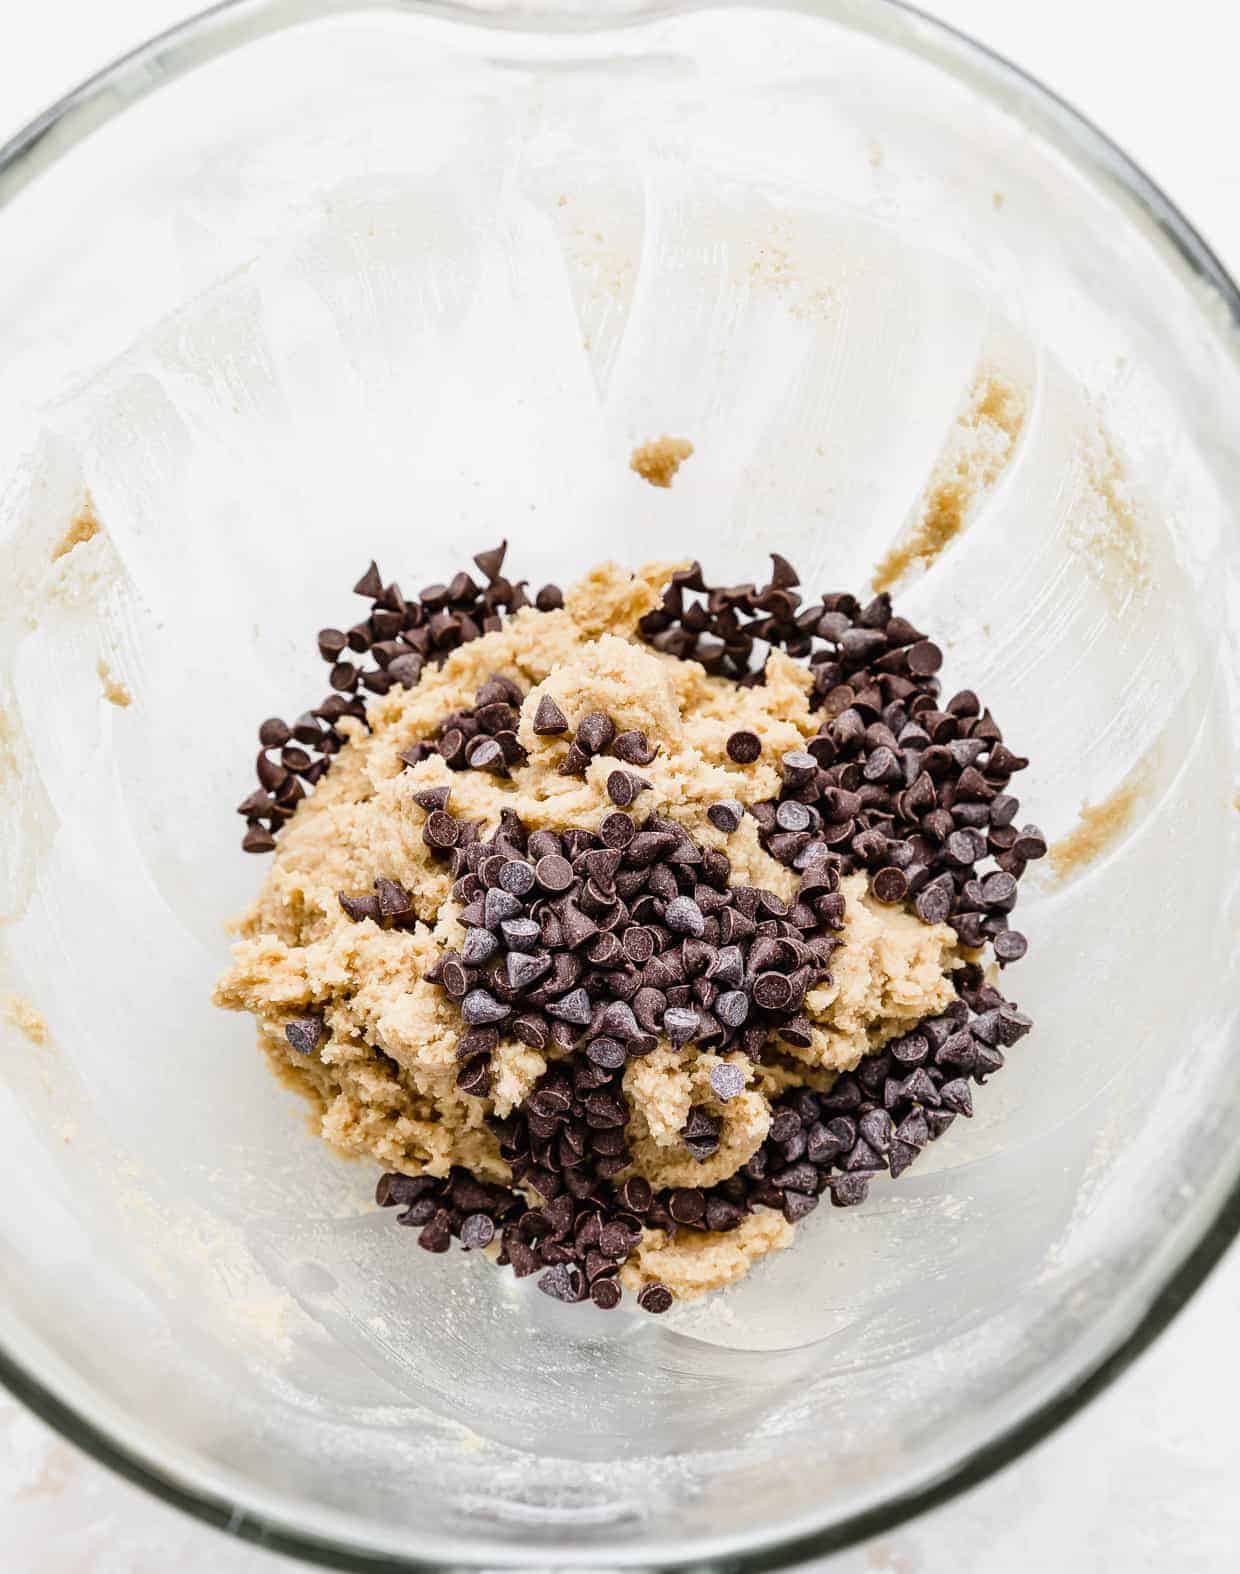 Mini chocolate chips added to a glass bowl with edible cookie dough in it.